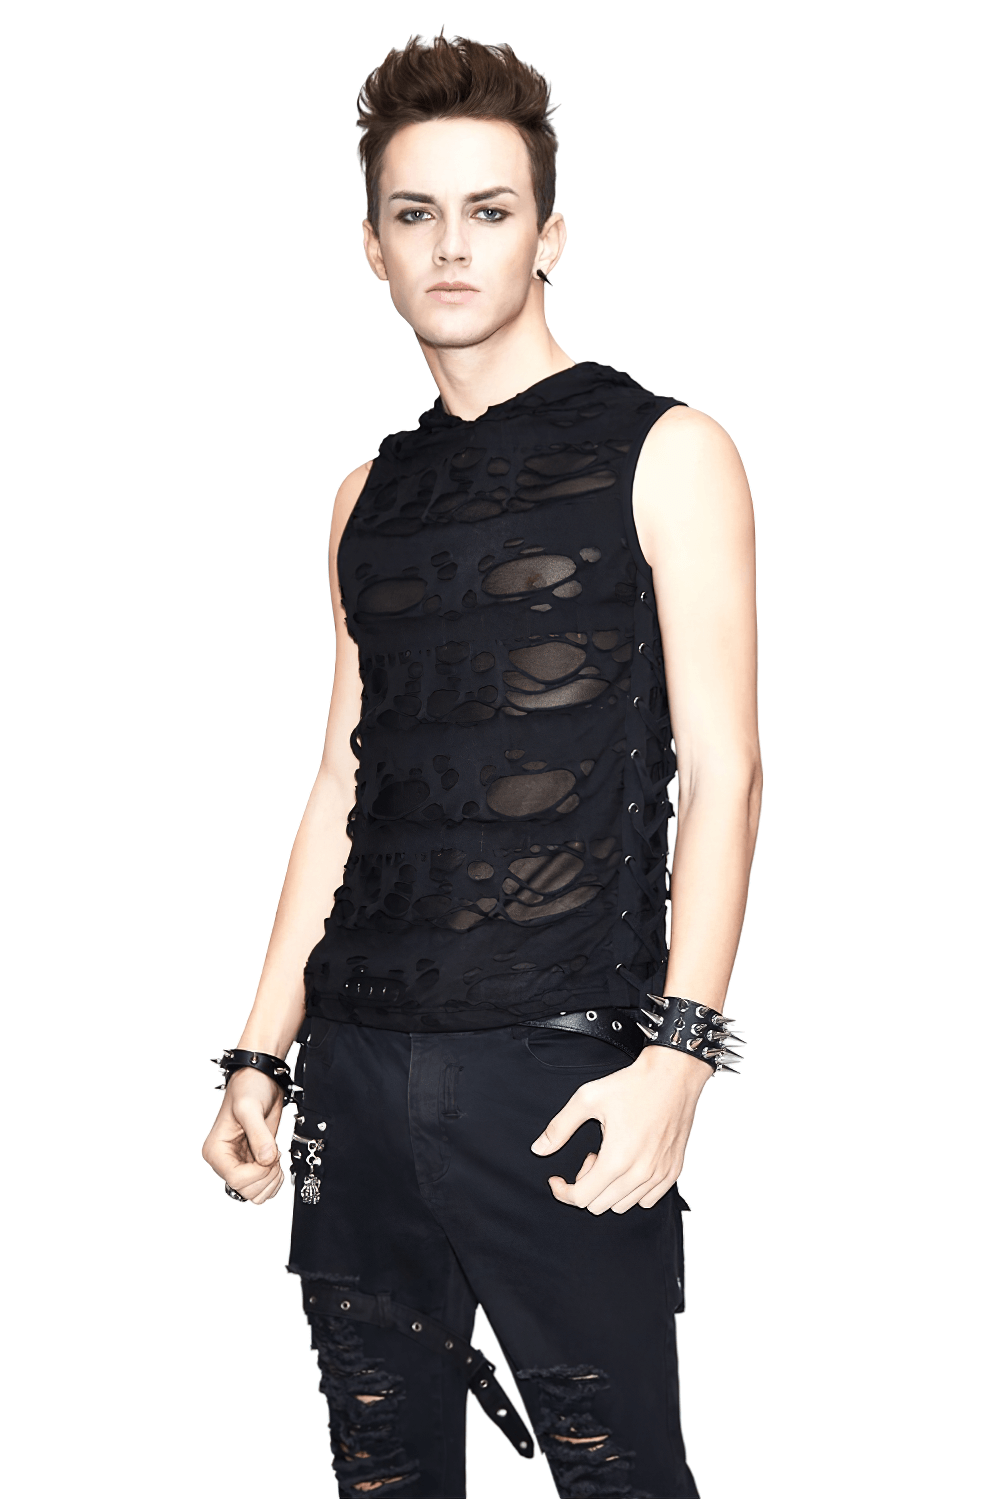 Gothic Men's Torn Tank Top With Hood / Male Black Out Fitted Tank Tops / Alternative Style Clothing